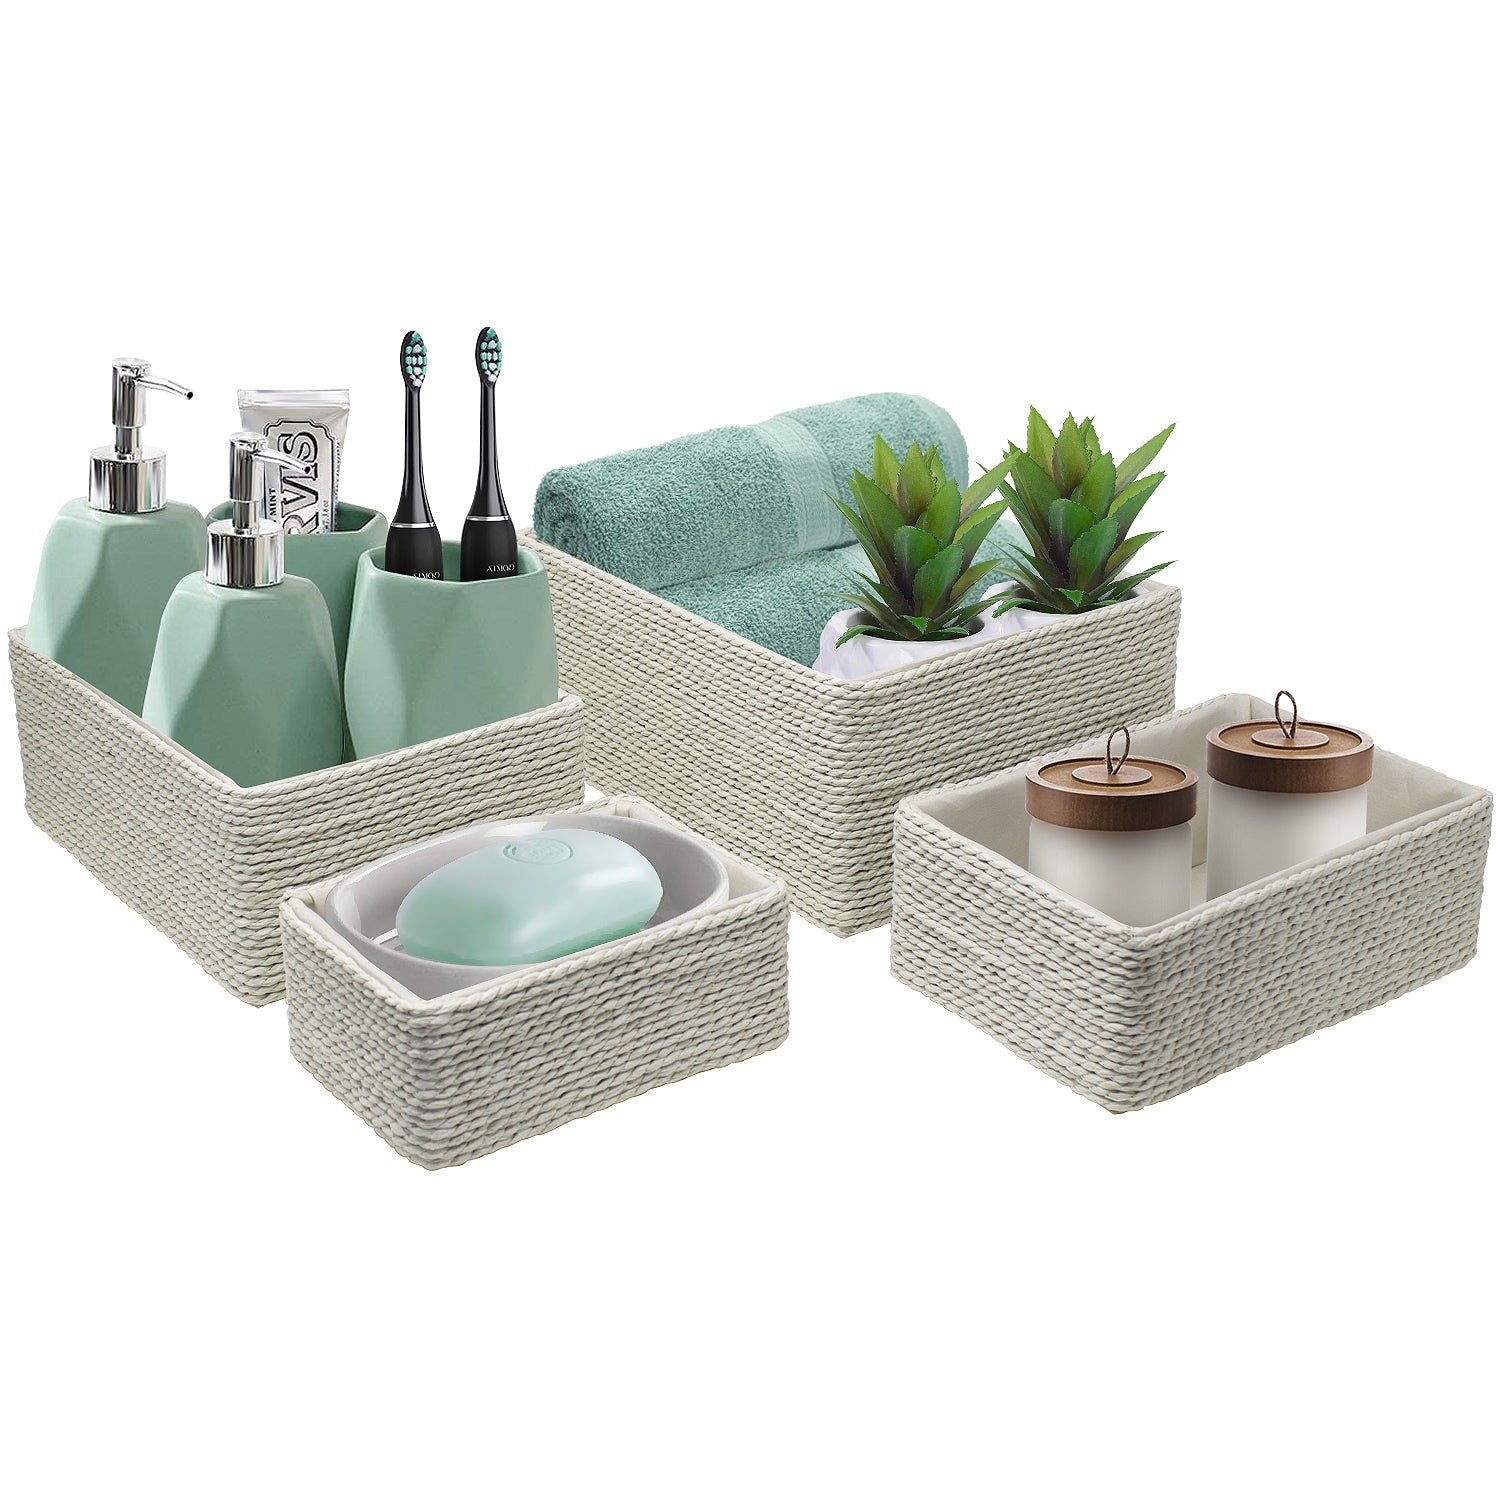 Woven Rope Baskets (4-Piece Set)